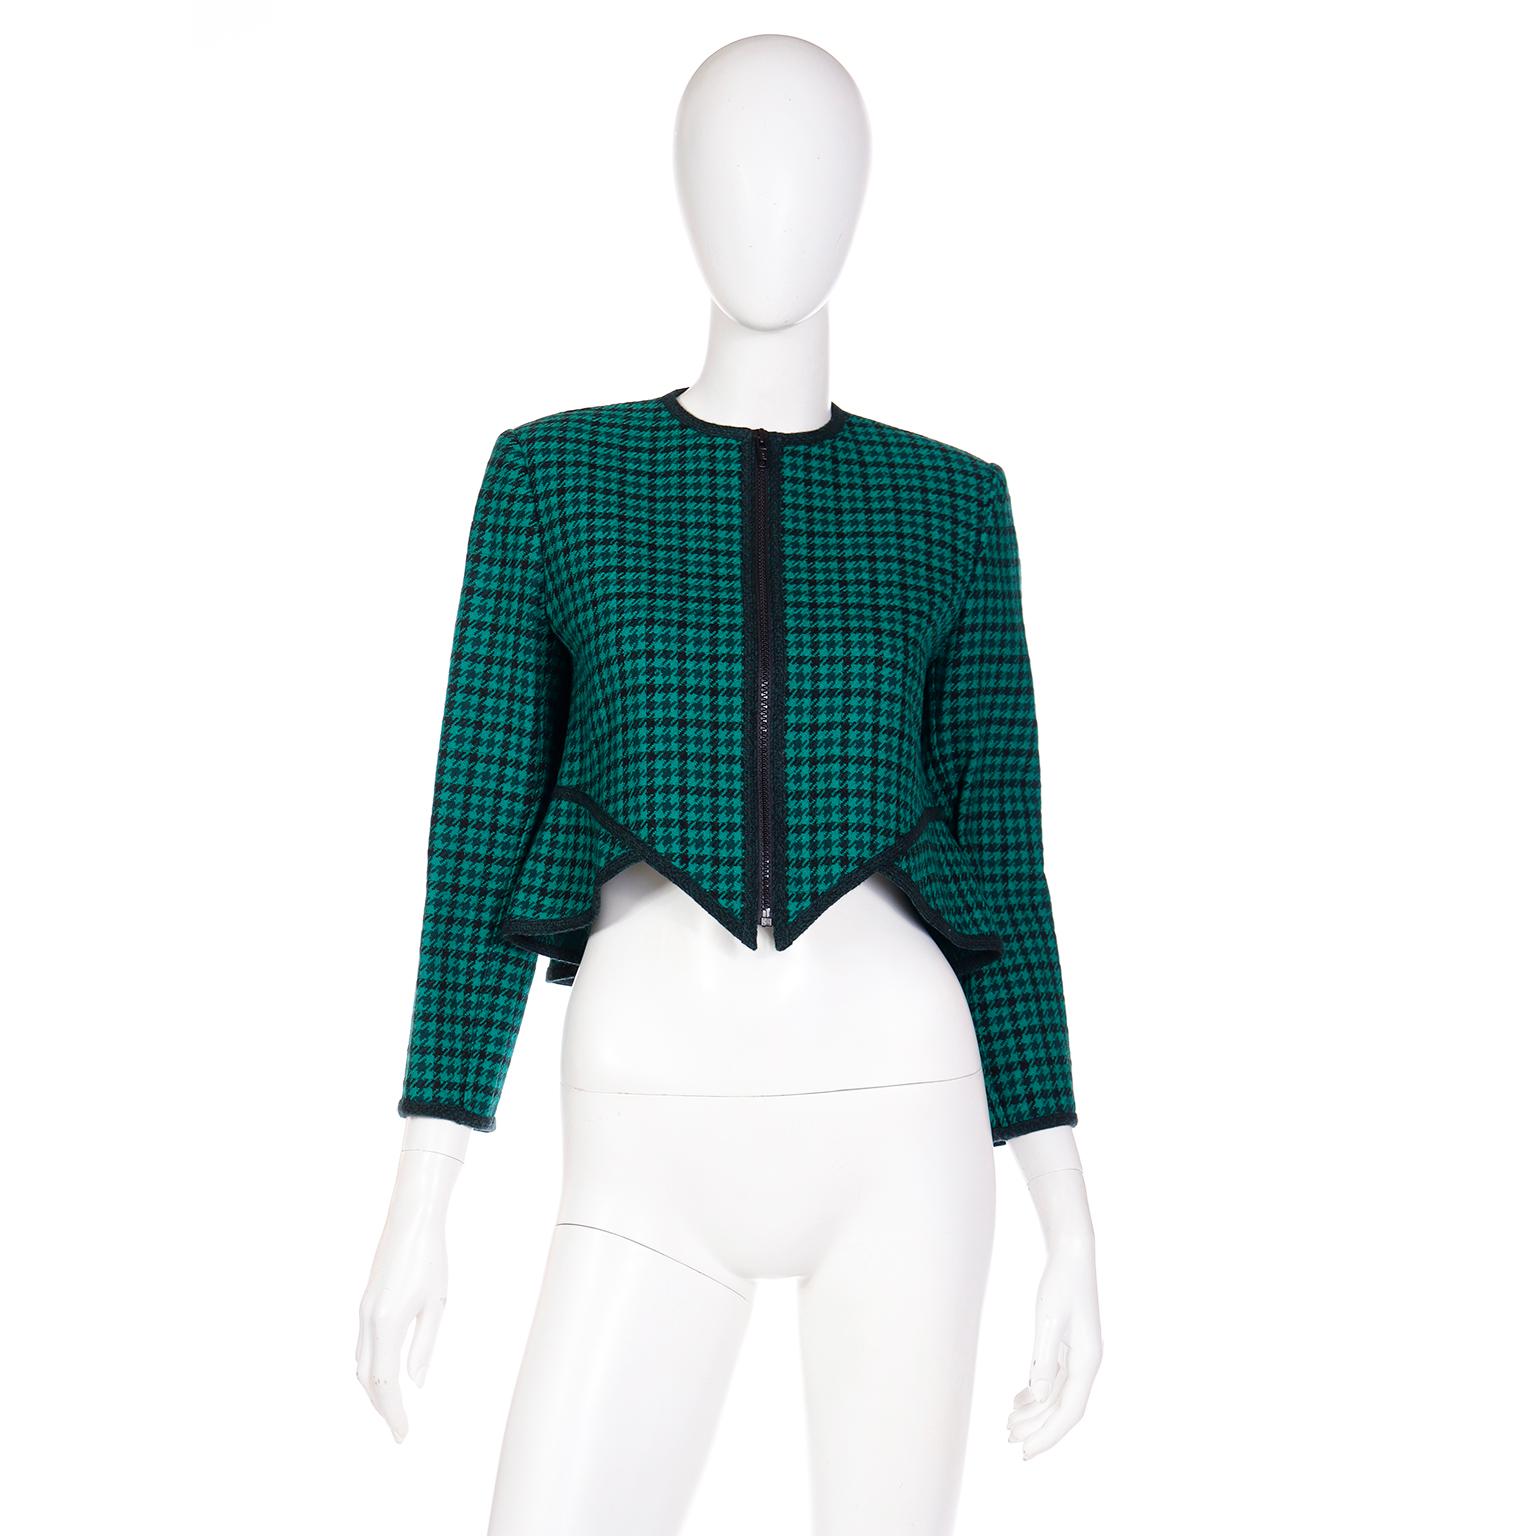 This vintage Geoffrey Beene jacket is in an iconic signature Beene silhouette. From the uniquely angled hem to the bold dark green trim, this piece is unmistakably a jacket designed by Mr. Beene. We love the cut of this jacket and it can be worn